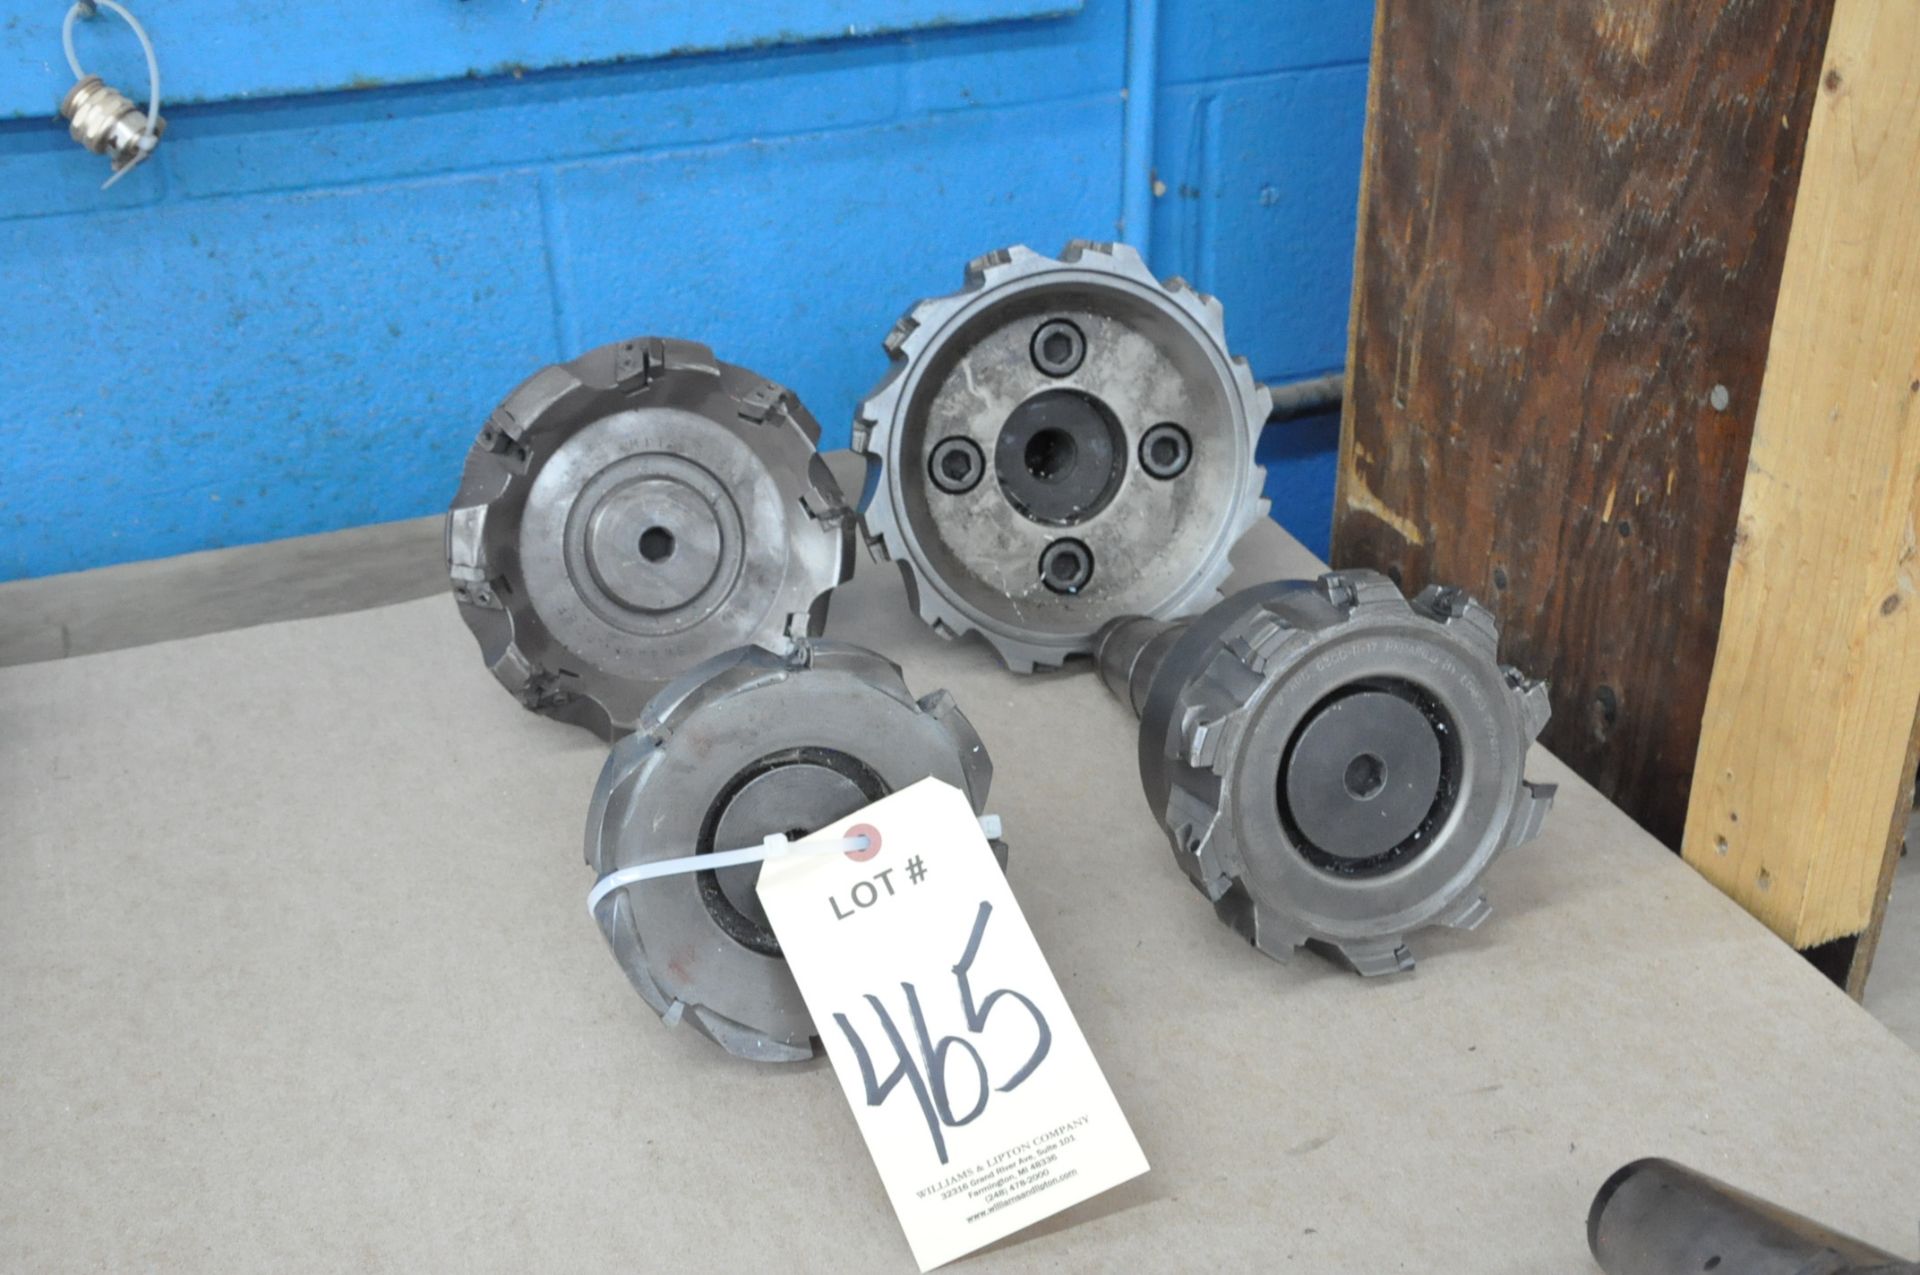 Lot-(4) BT 50 Taper Tool Holders with Face Mill Heads